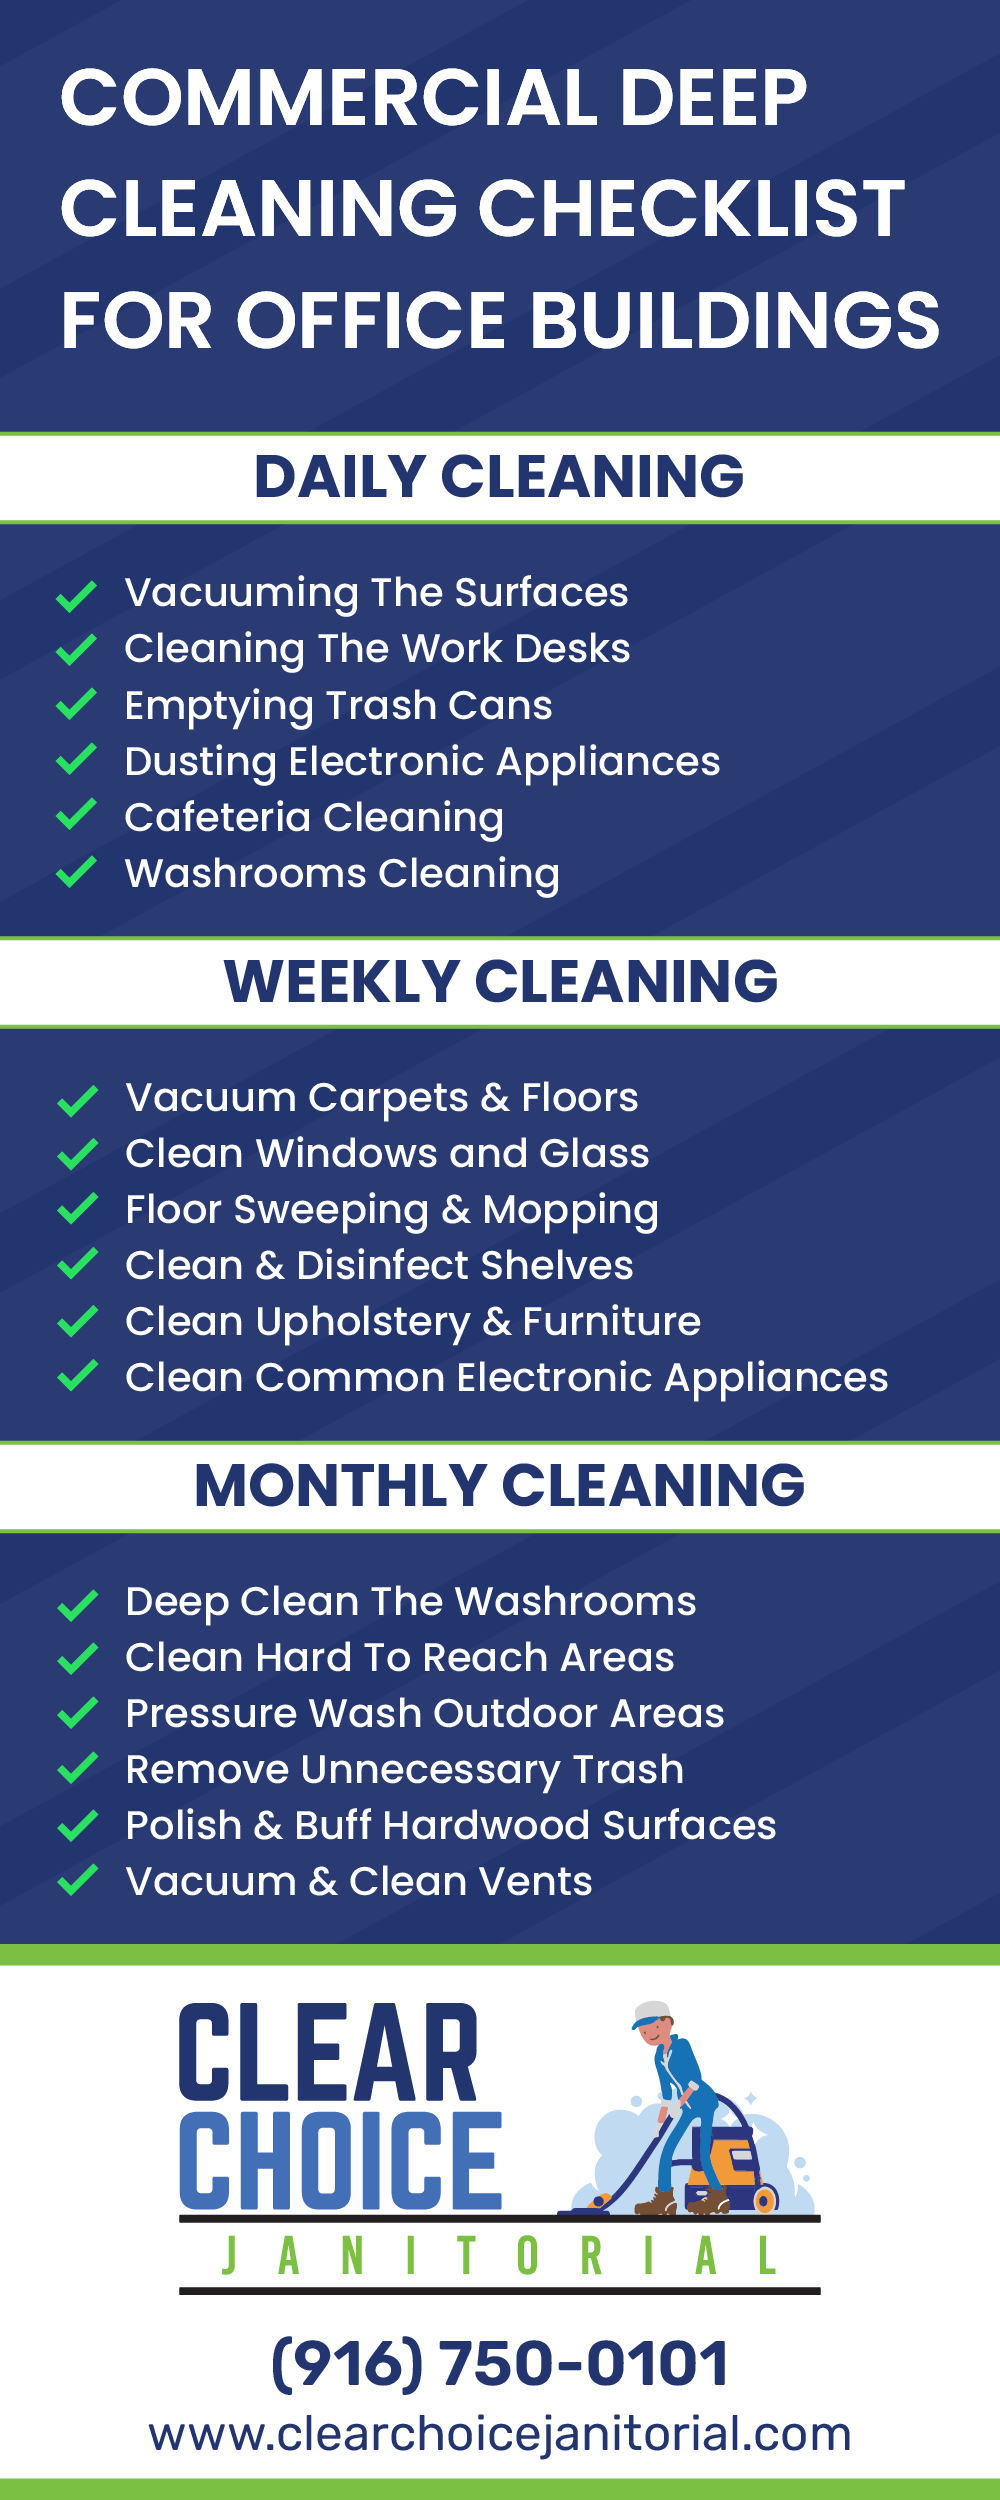 Commercial Deep Cleaning Checklist for Office Buildings